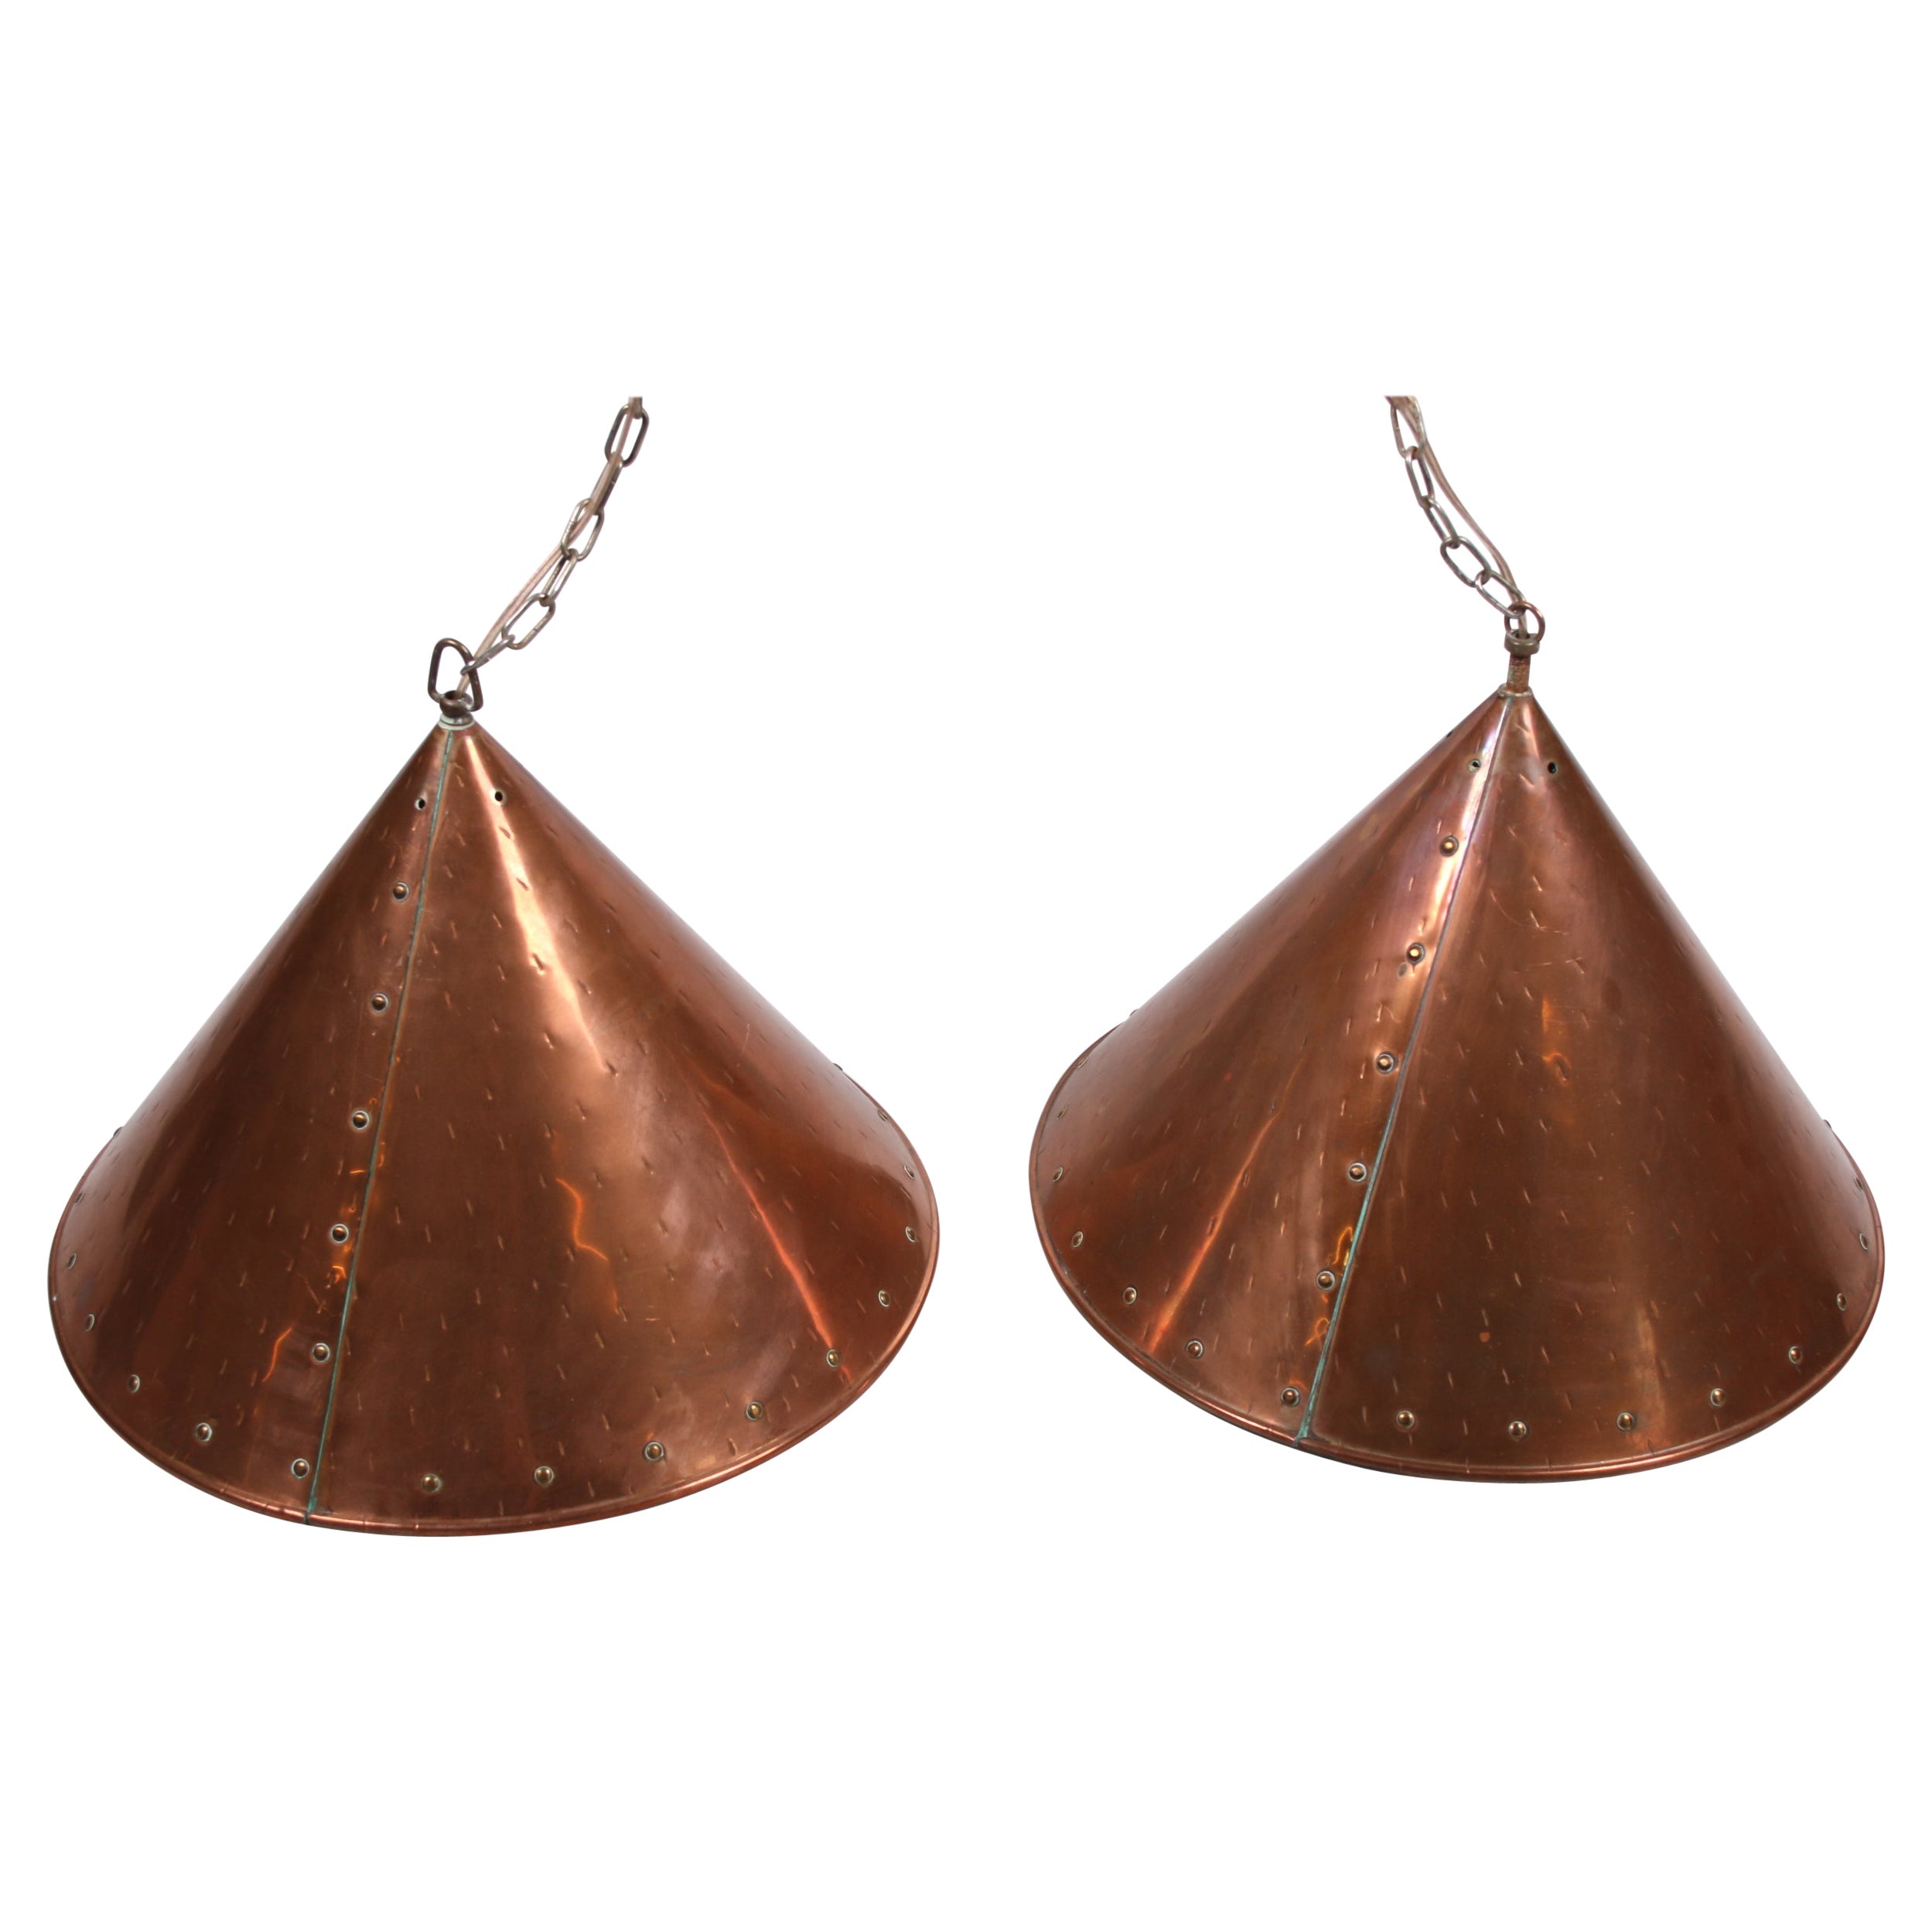 Danish Hand Hammered Copper Pendant Lamps by ES Horn Aalestrup, 1950s For Sale